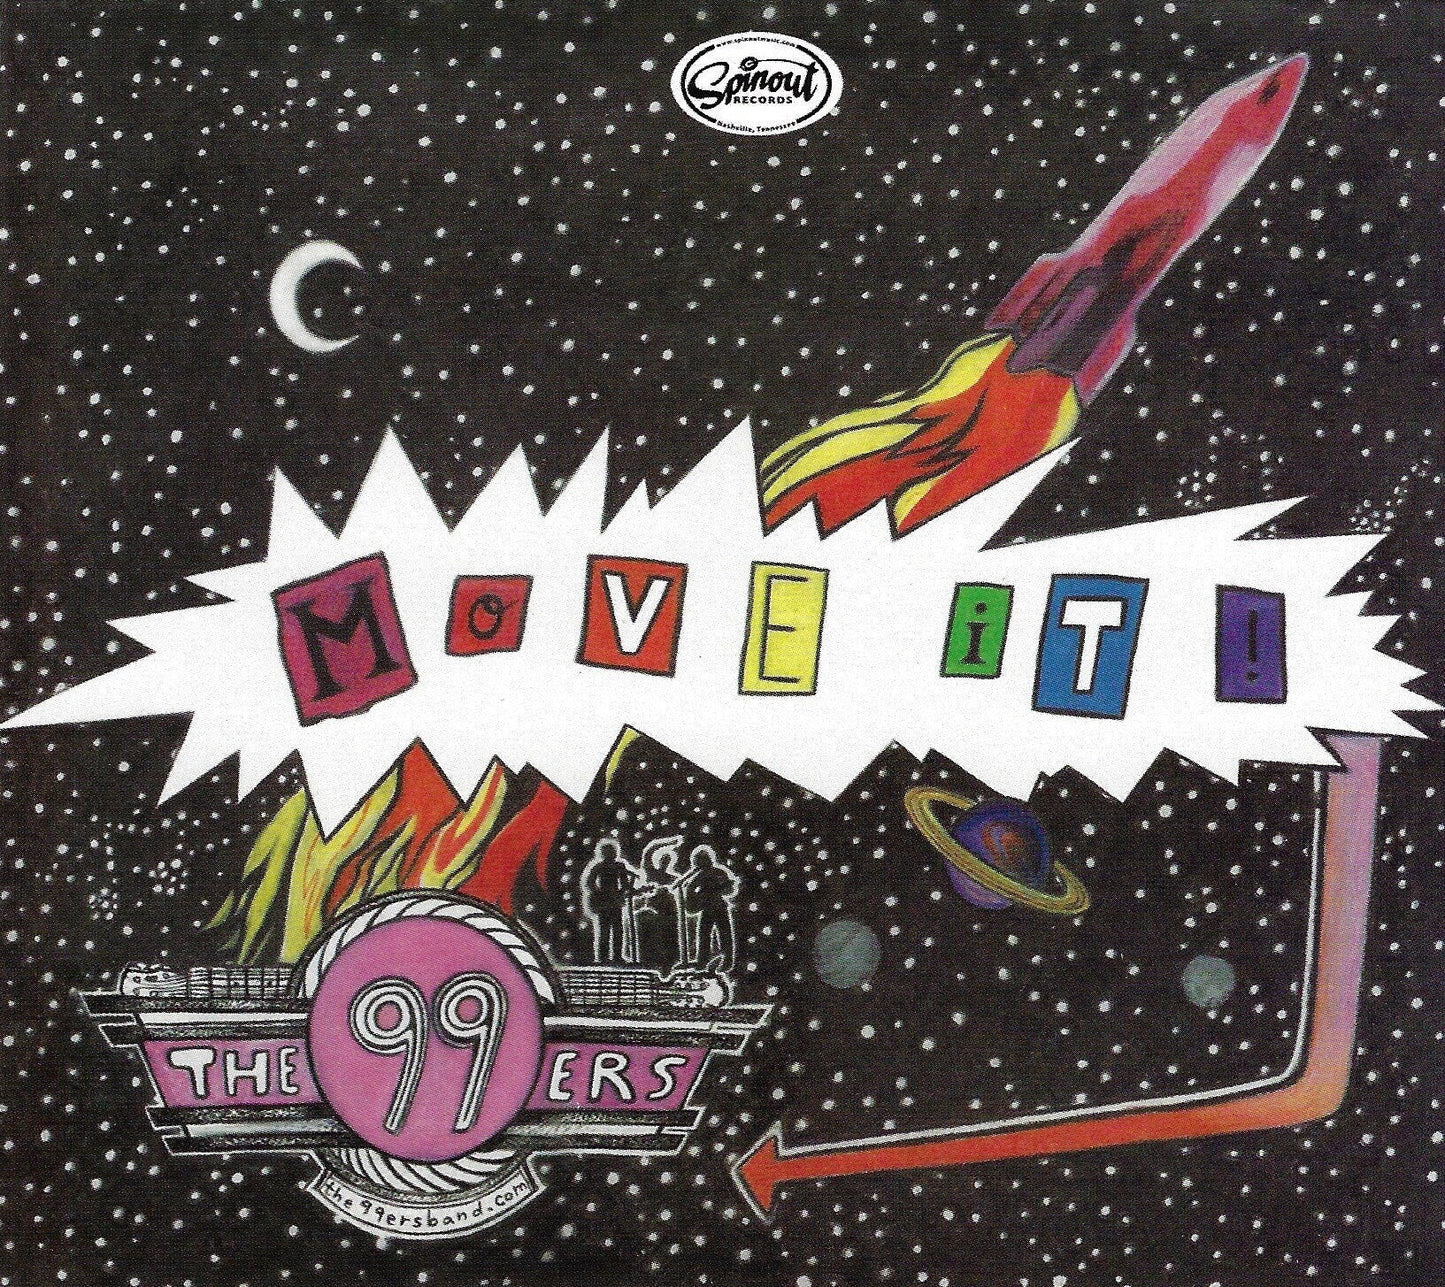 The 99ers "Move It" CD